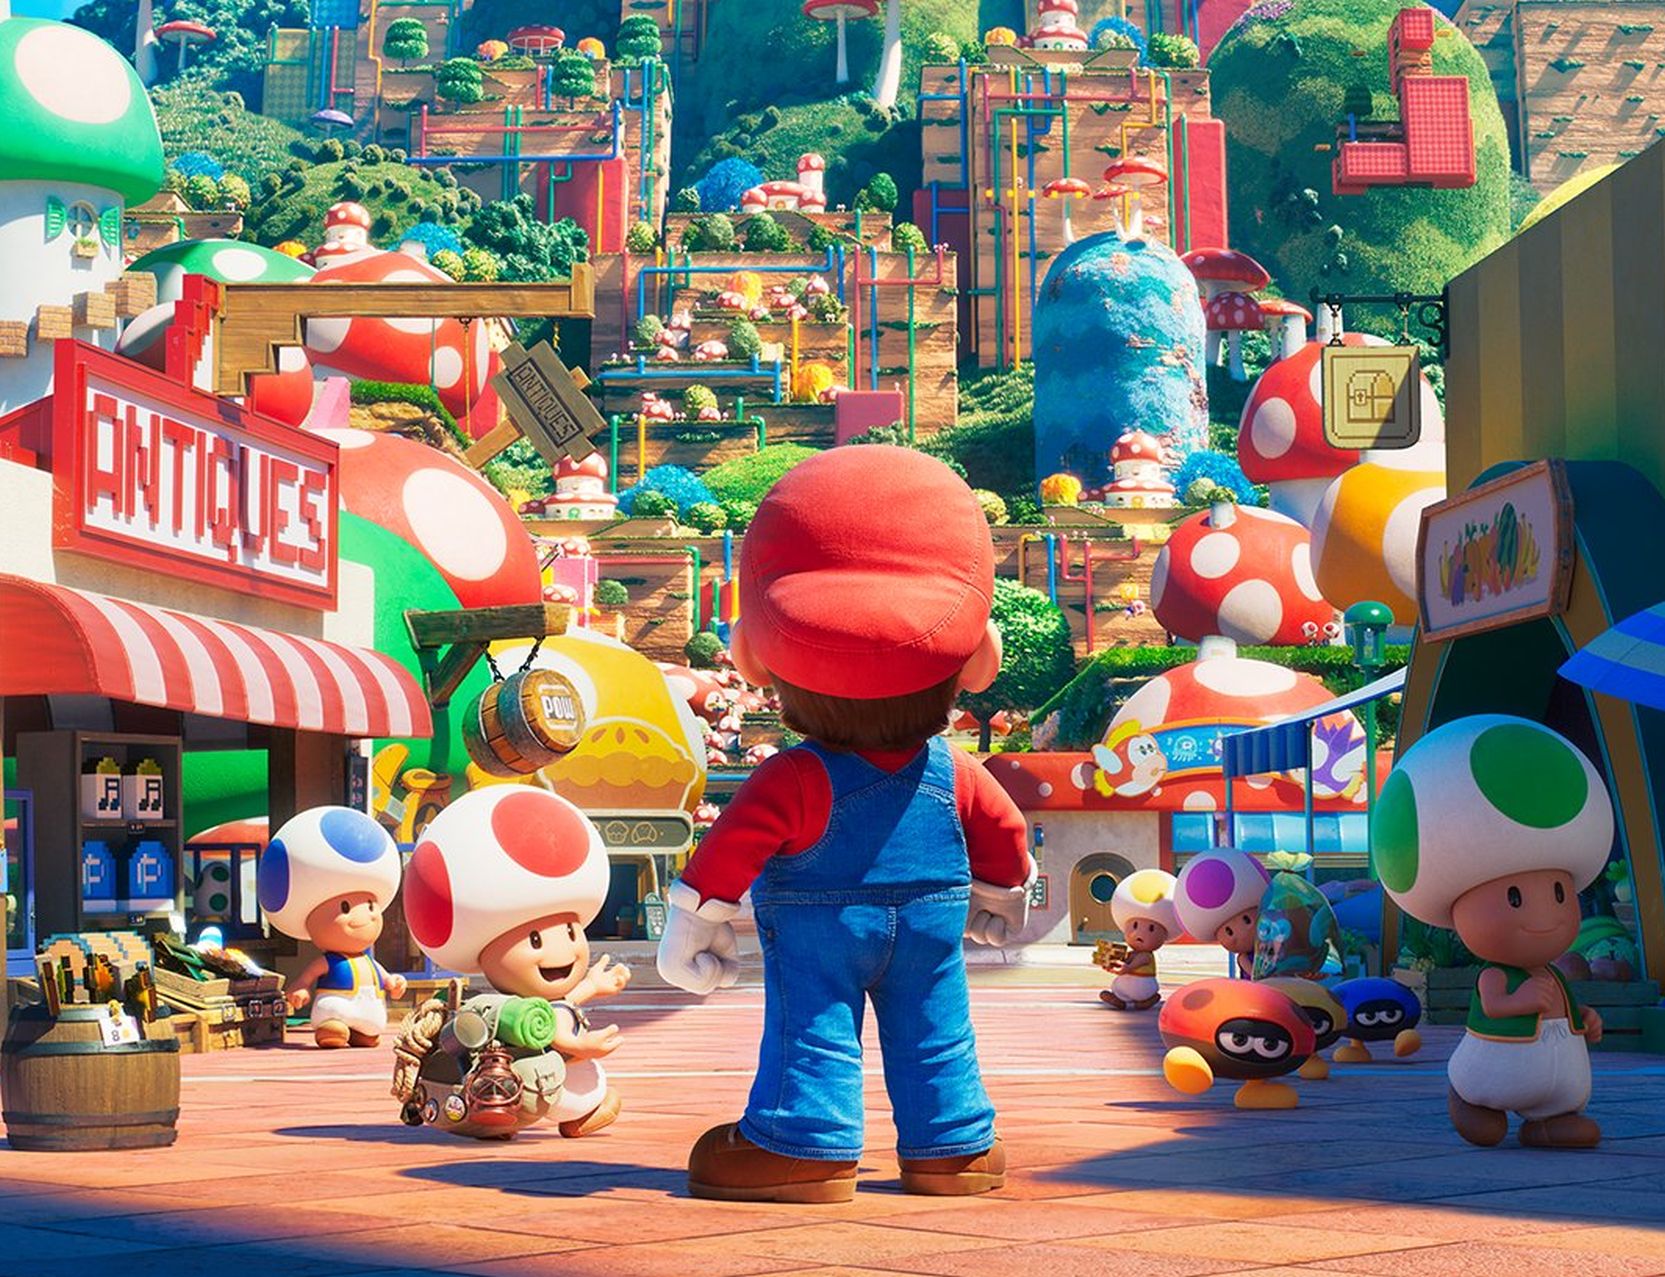 Image for Next Nintendo Direct to debut world premiere trailer for the Super Mario Bros. movie